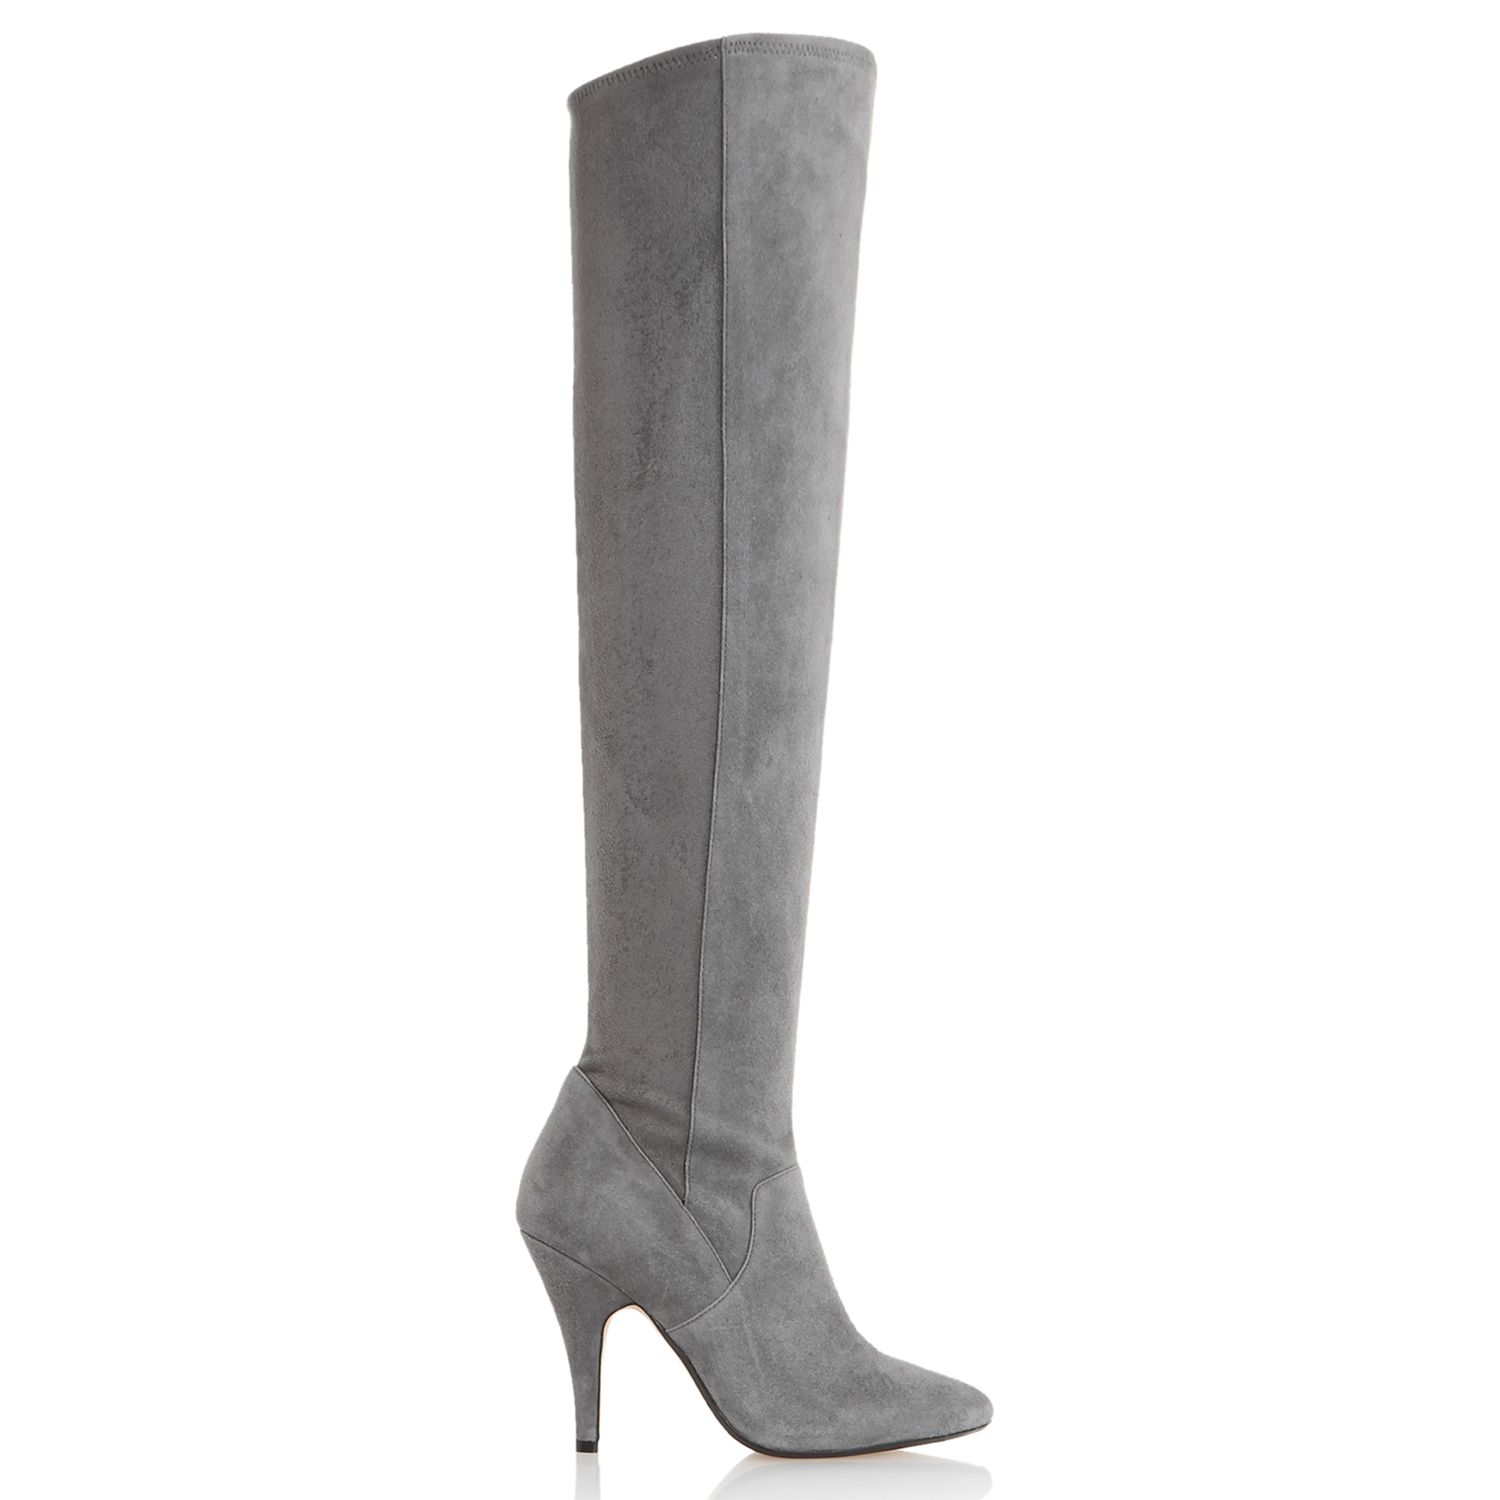 Dune Stretchy Over the Knee Heeled Boots, Grey Suede